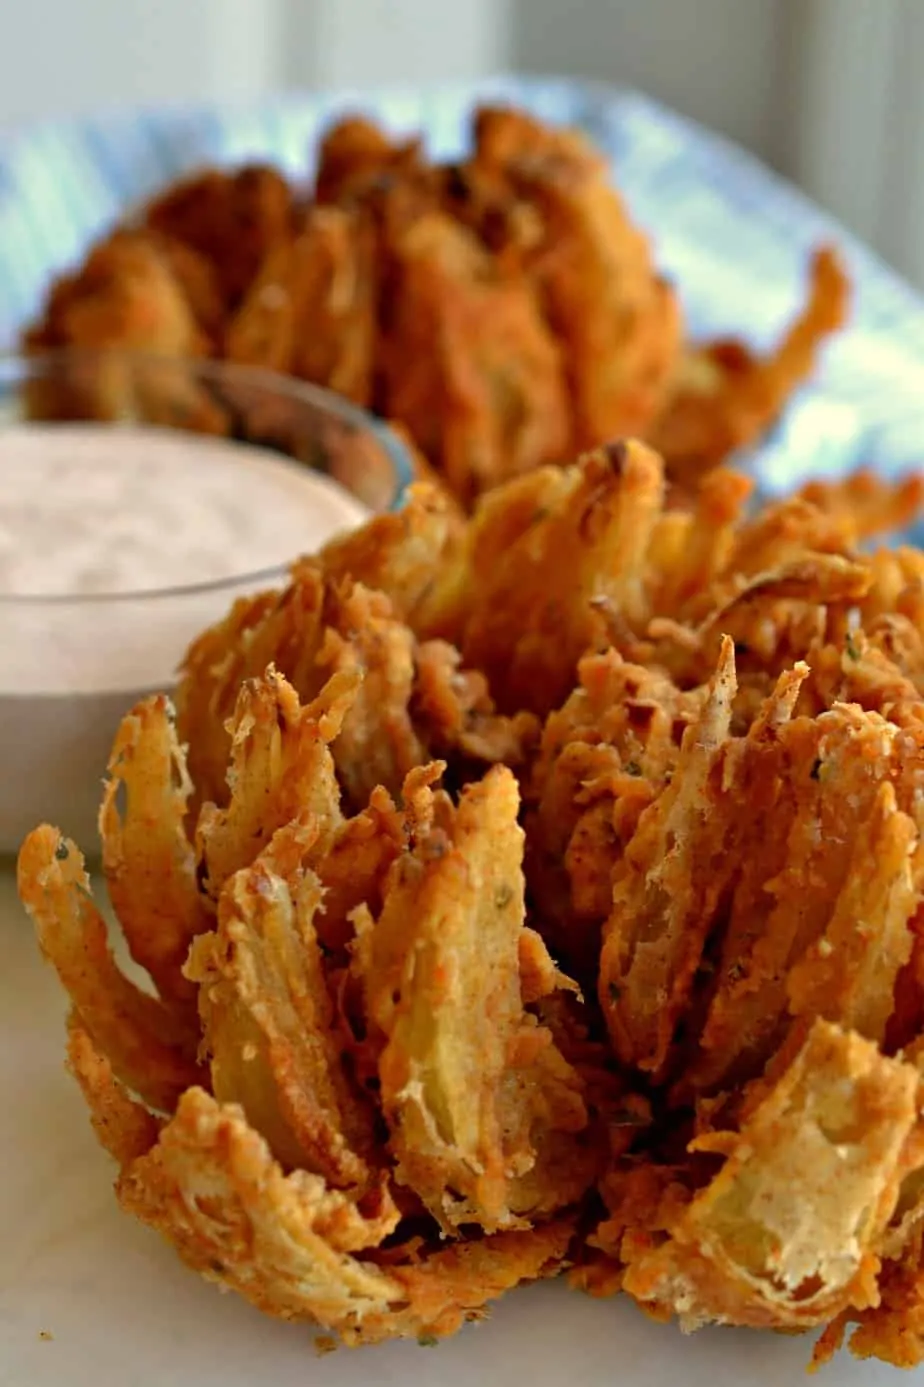 Make a delicious blooming onion for your family today and don't forget the tasty dipping sauce.